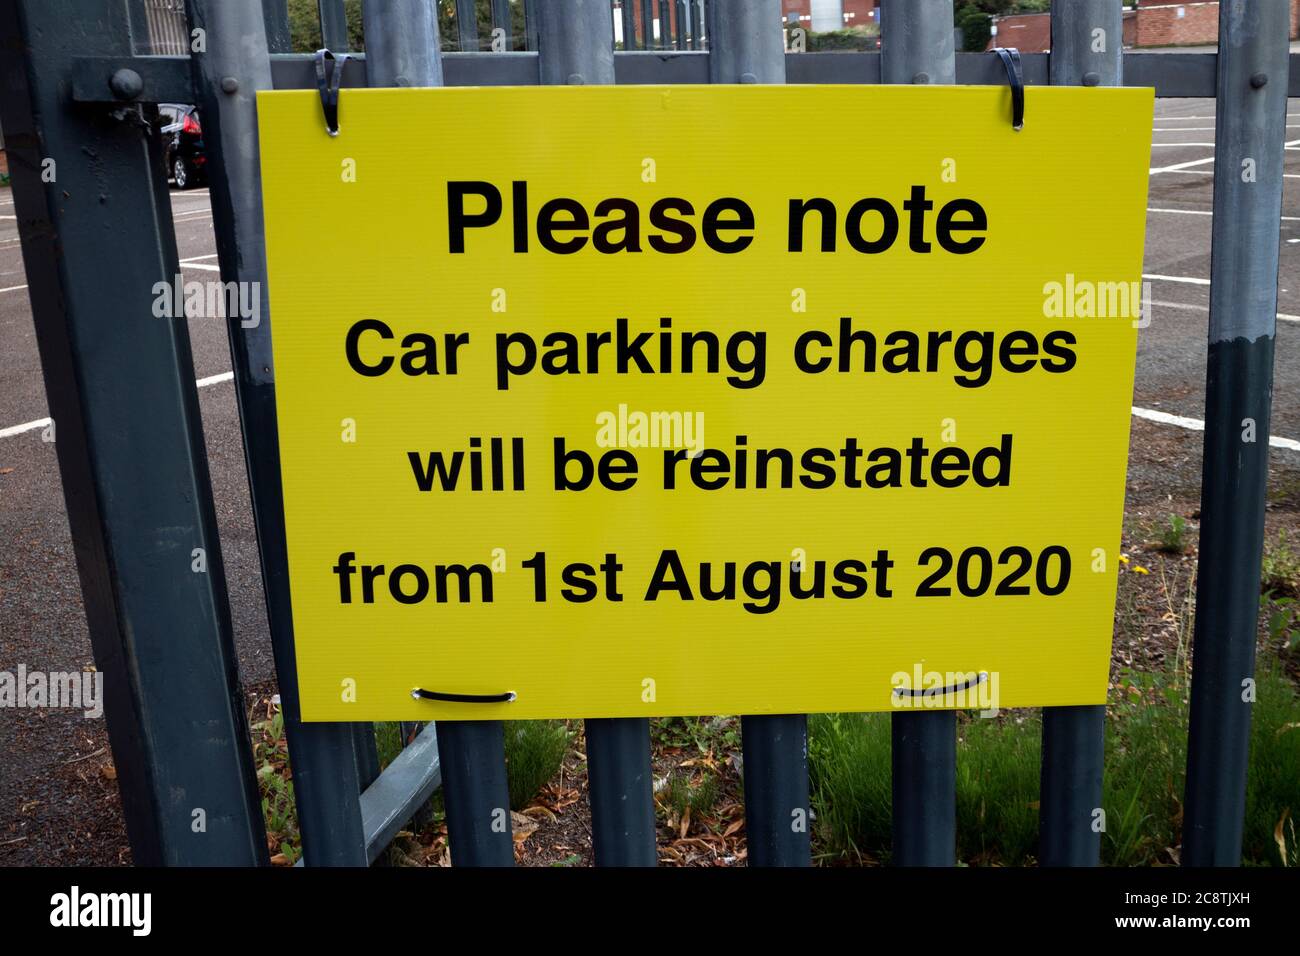 Car park charges reinstated sign during Covid-19 pandemic, UK Stock Photo